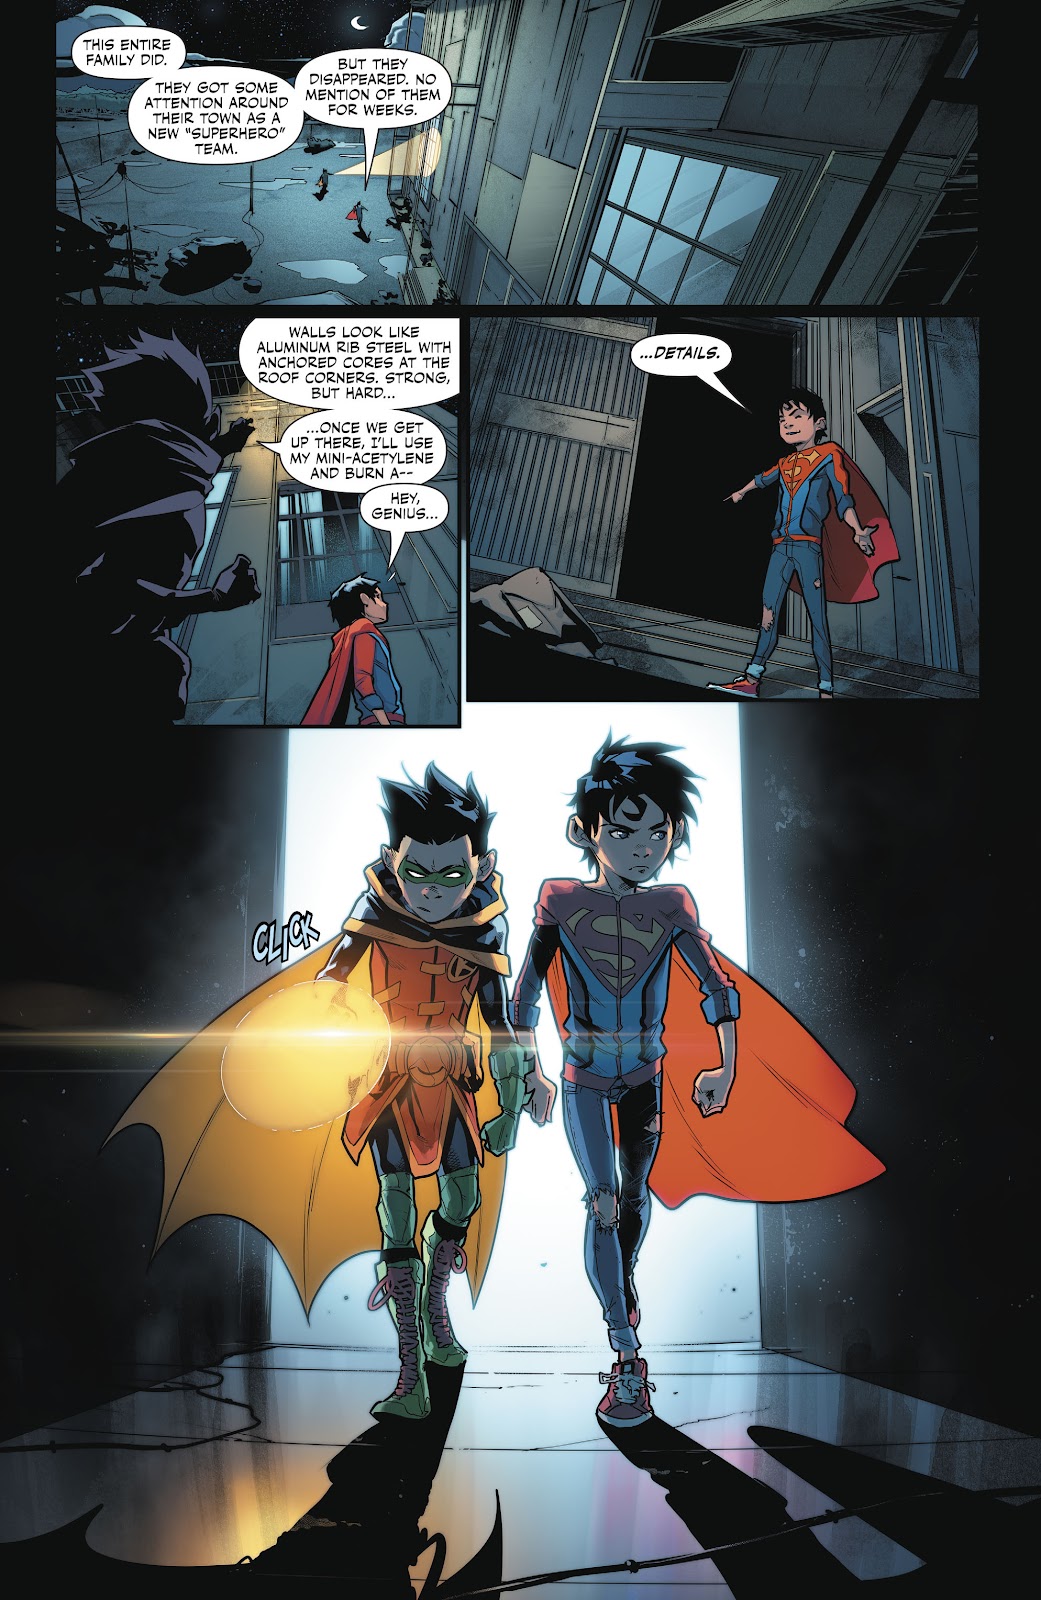 Super Sons Issue Read Super Sons Issue Comic Online In High Quality Read Full Comic